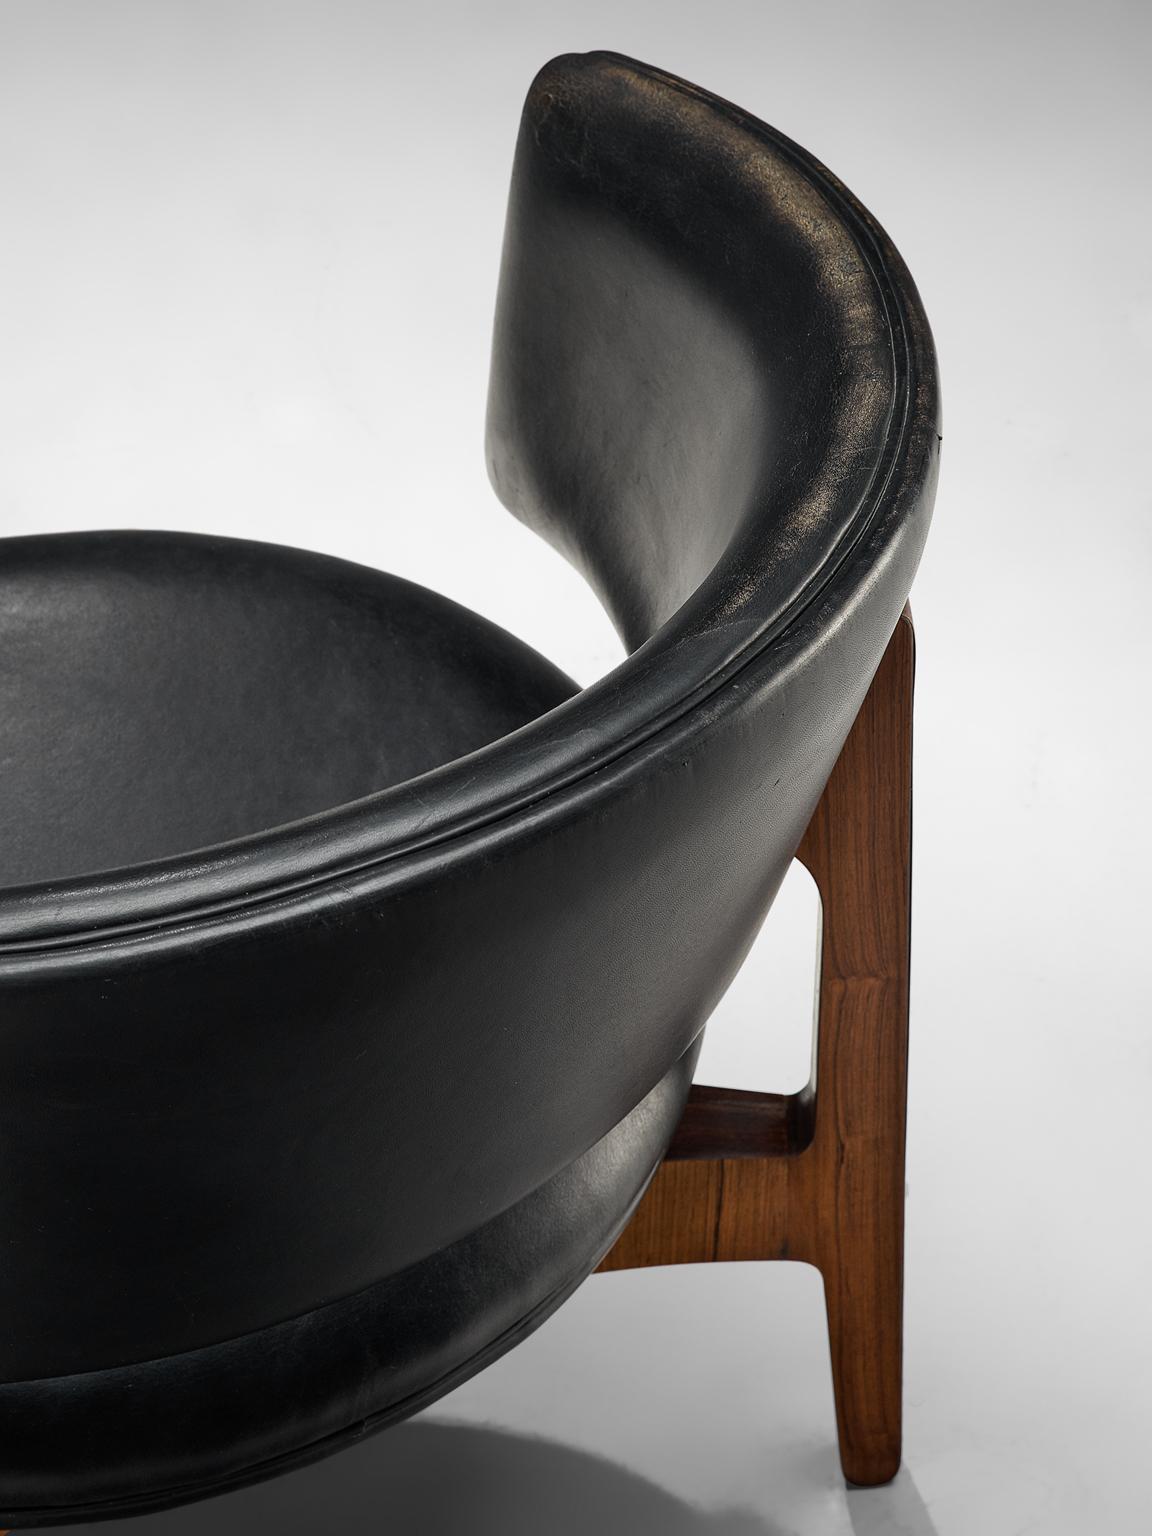 Mid-20th Century Sven Ellekaer Lounge Chair in Rosewood and Original Black Leather